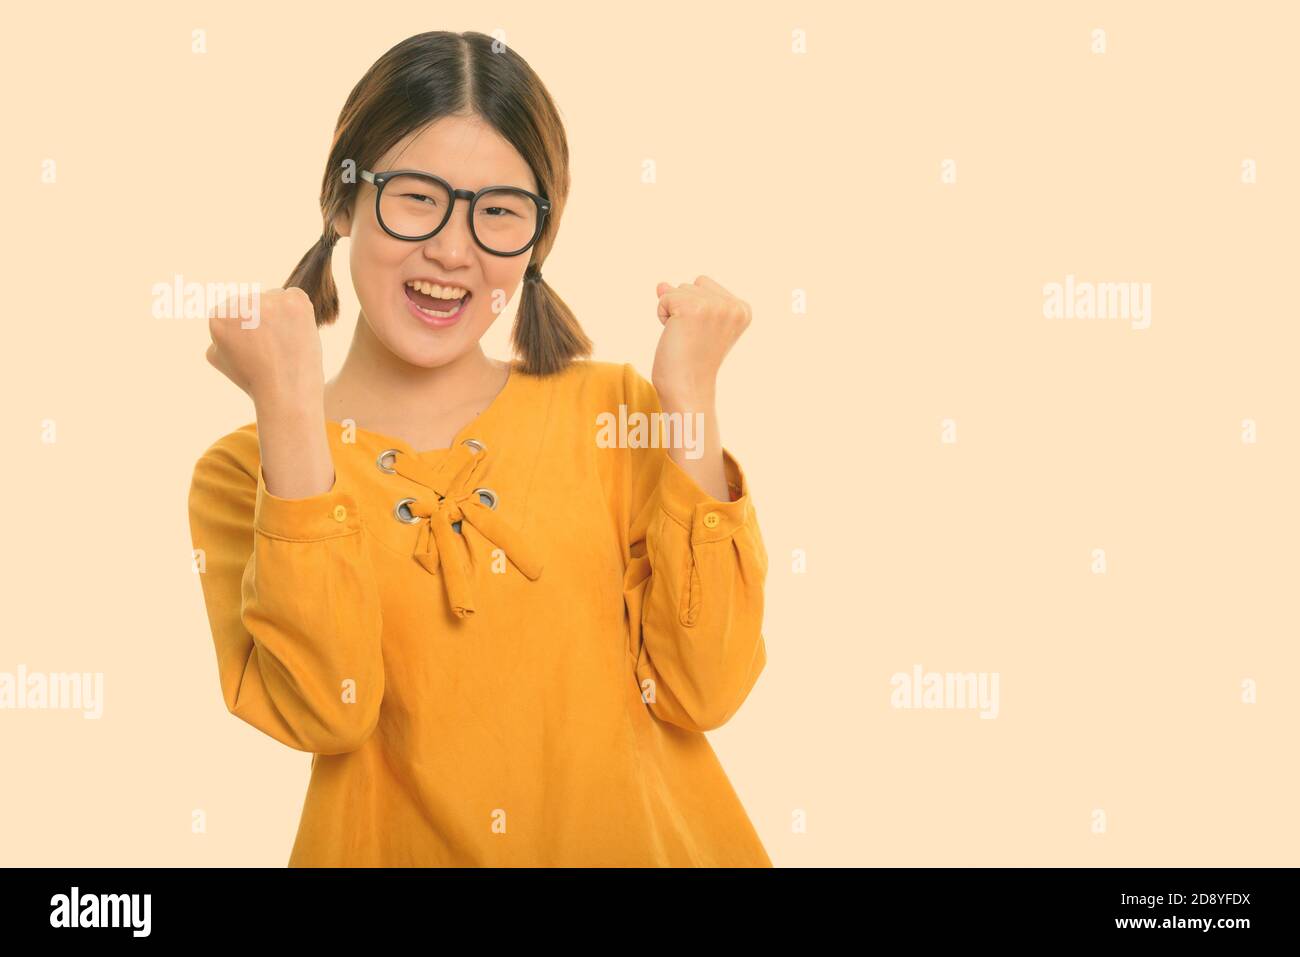 Studio shot of young happy Asian woman cheering with both arms raised Stock Photo